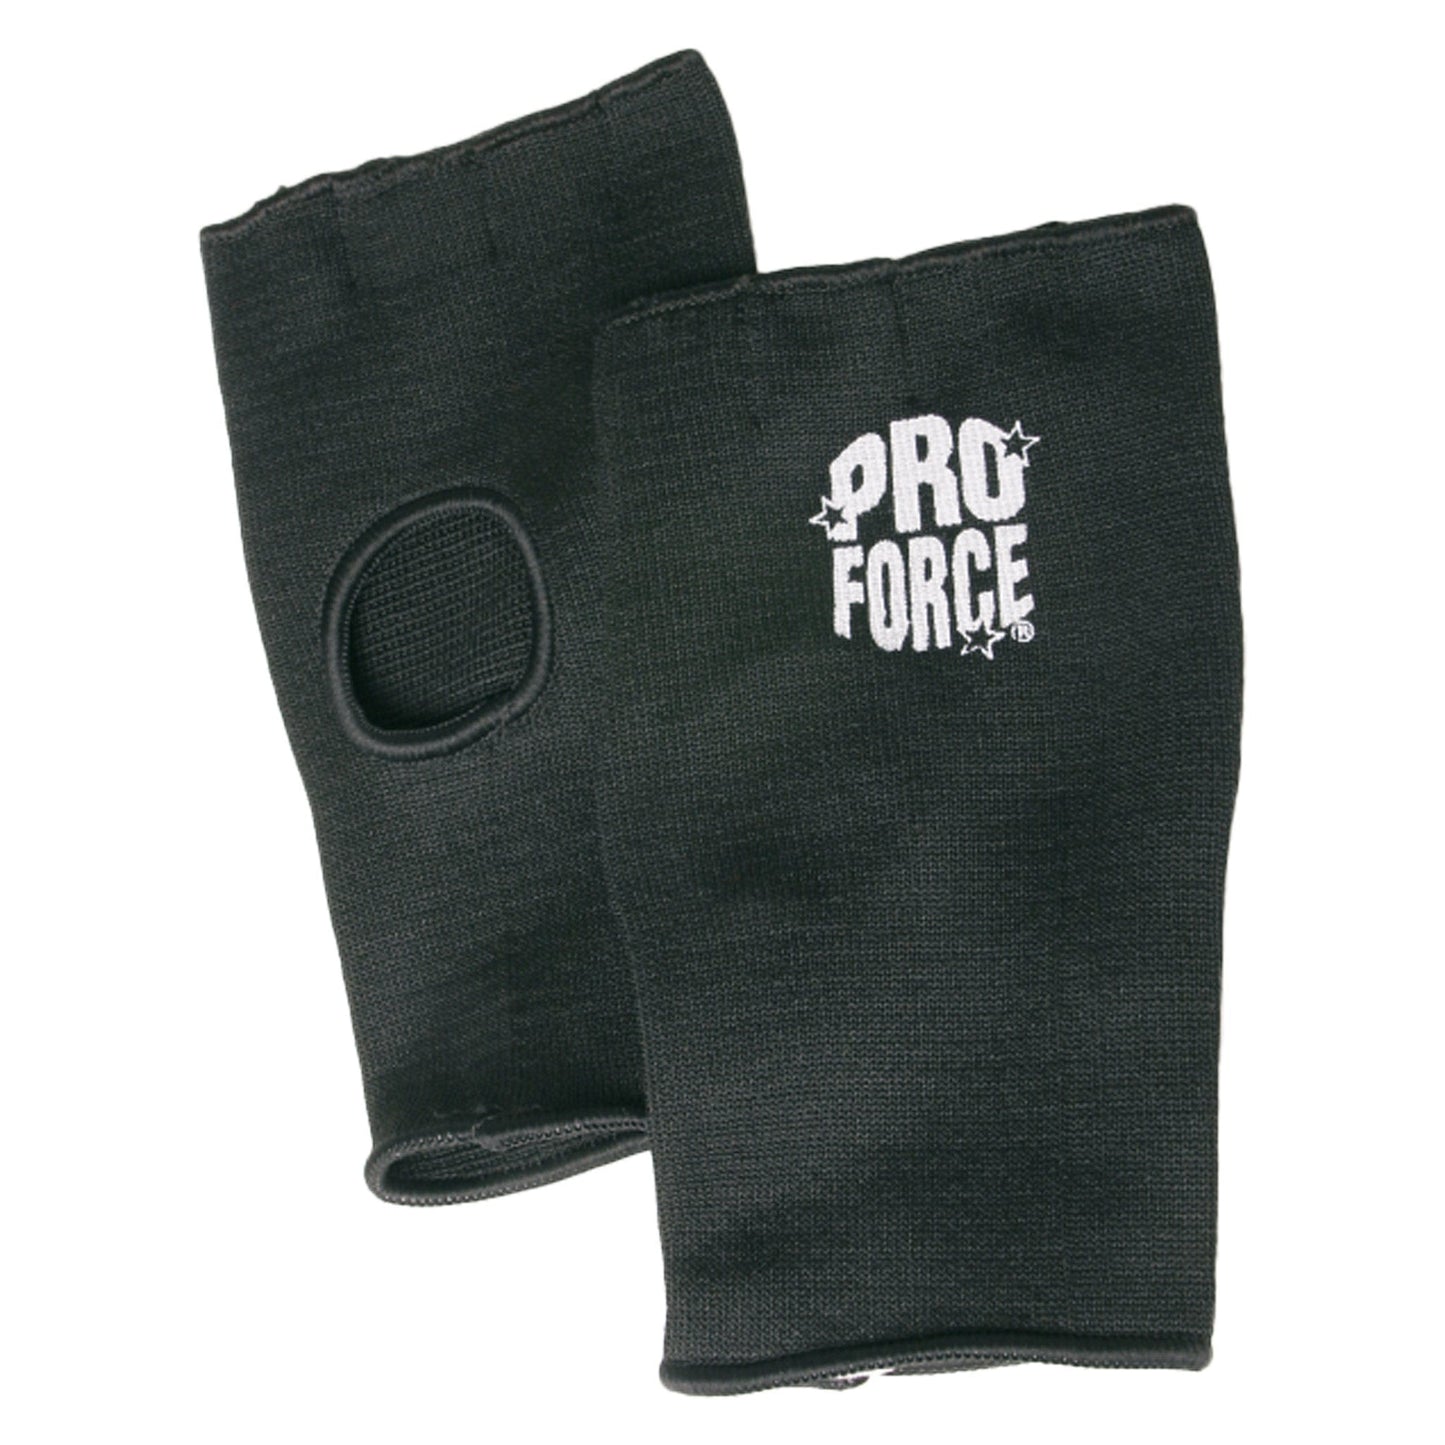 Eclipse Martial Art Supplies x-small ProForce Slide-On Handwraps boxing and kickboxing